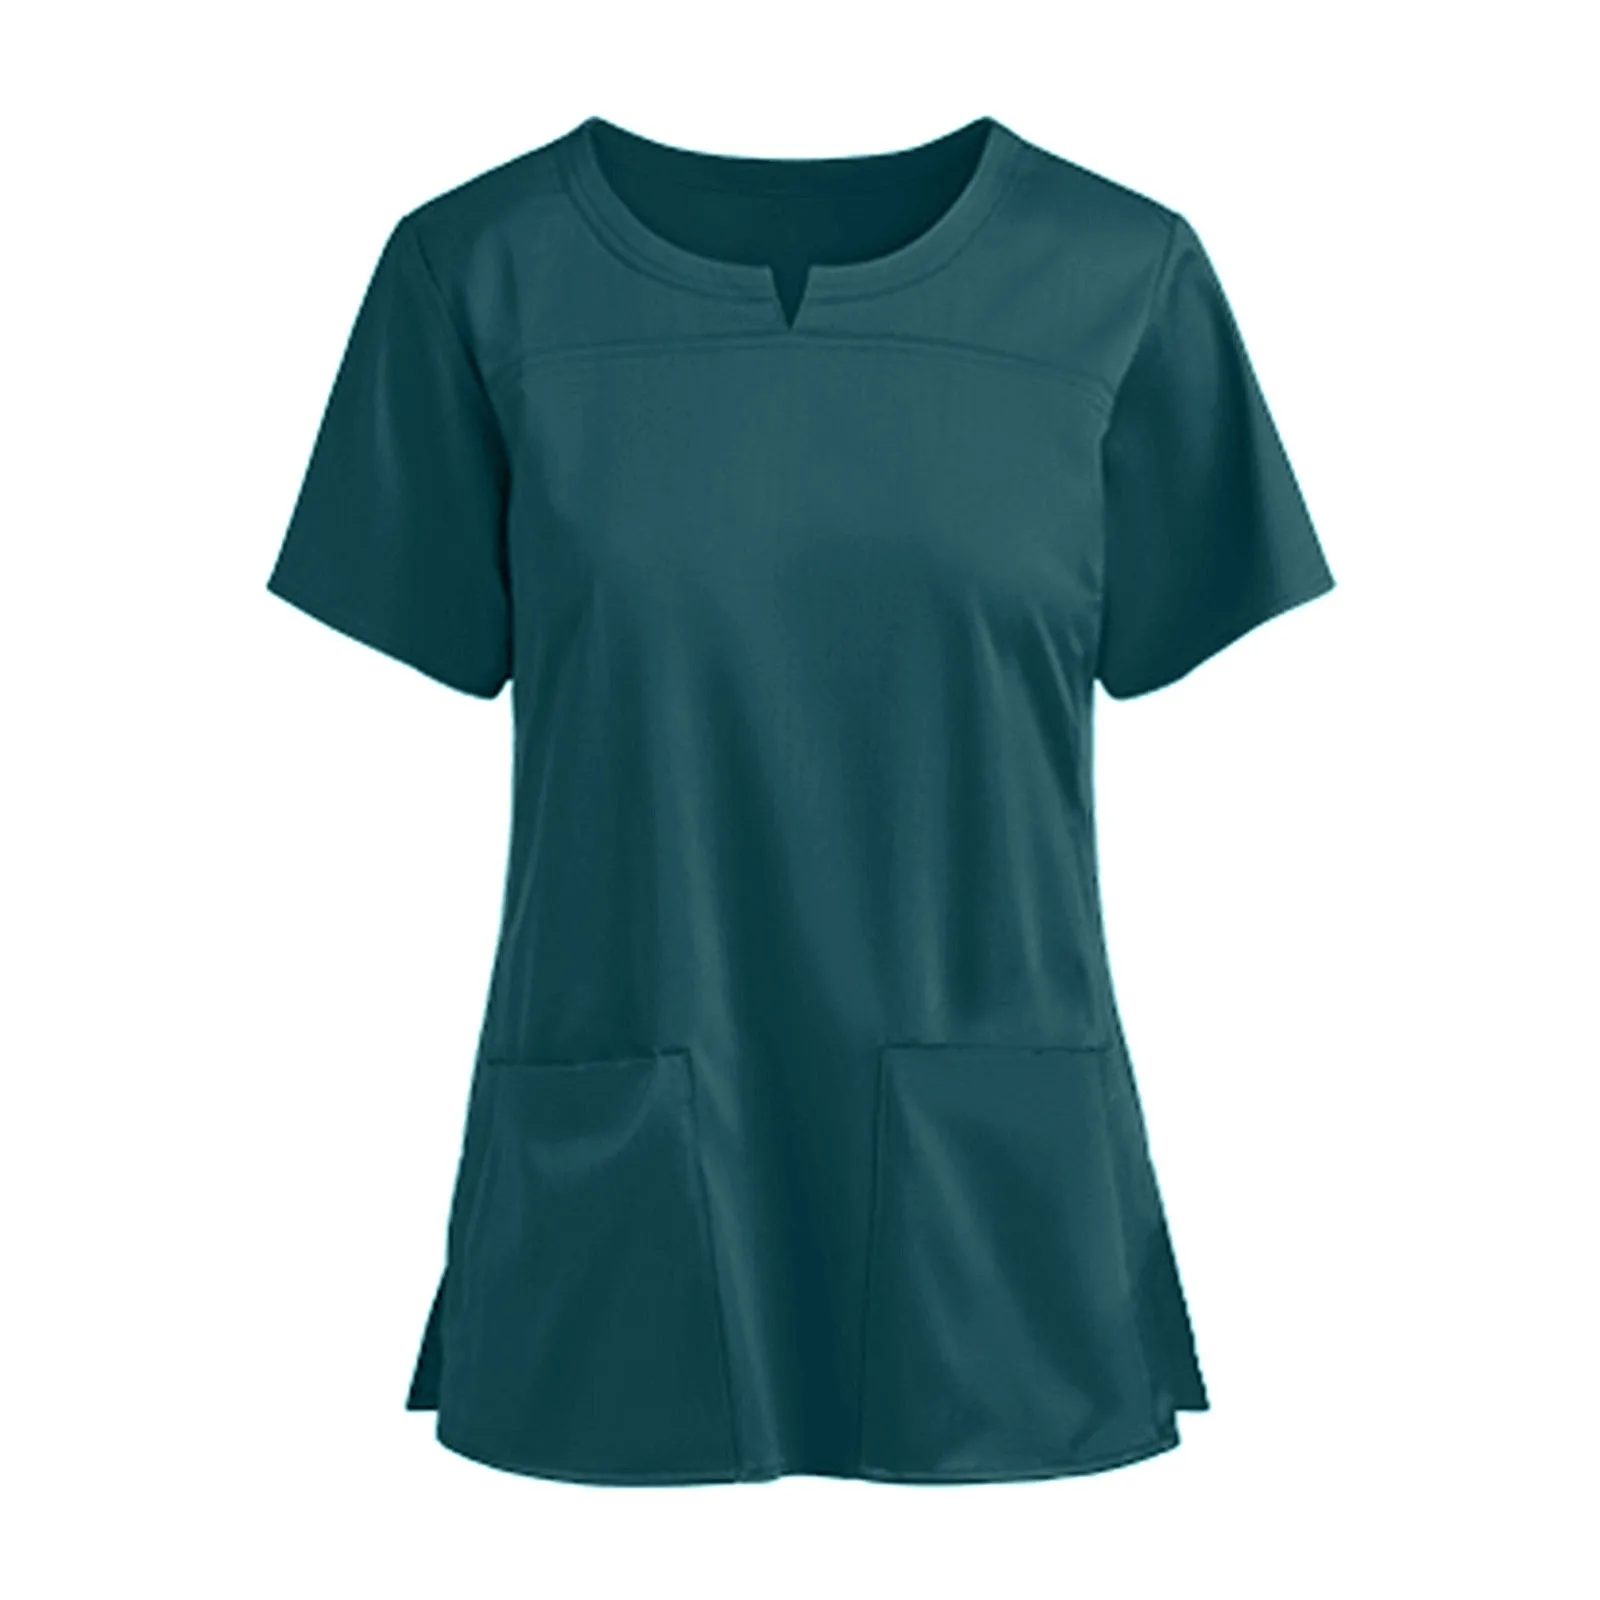 Nurse Uniform Women Solid Color Round Neck Short Sleeve Pockets Loose Blouse Scrubs Shirts Medical Healthcare Workers Uniform unisex top pants v neck long sleeve solid color nurse working uniform scrubs set quick dry with pocket breathable medical